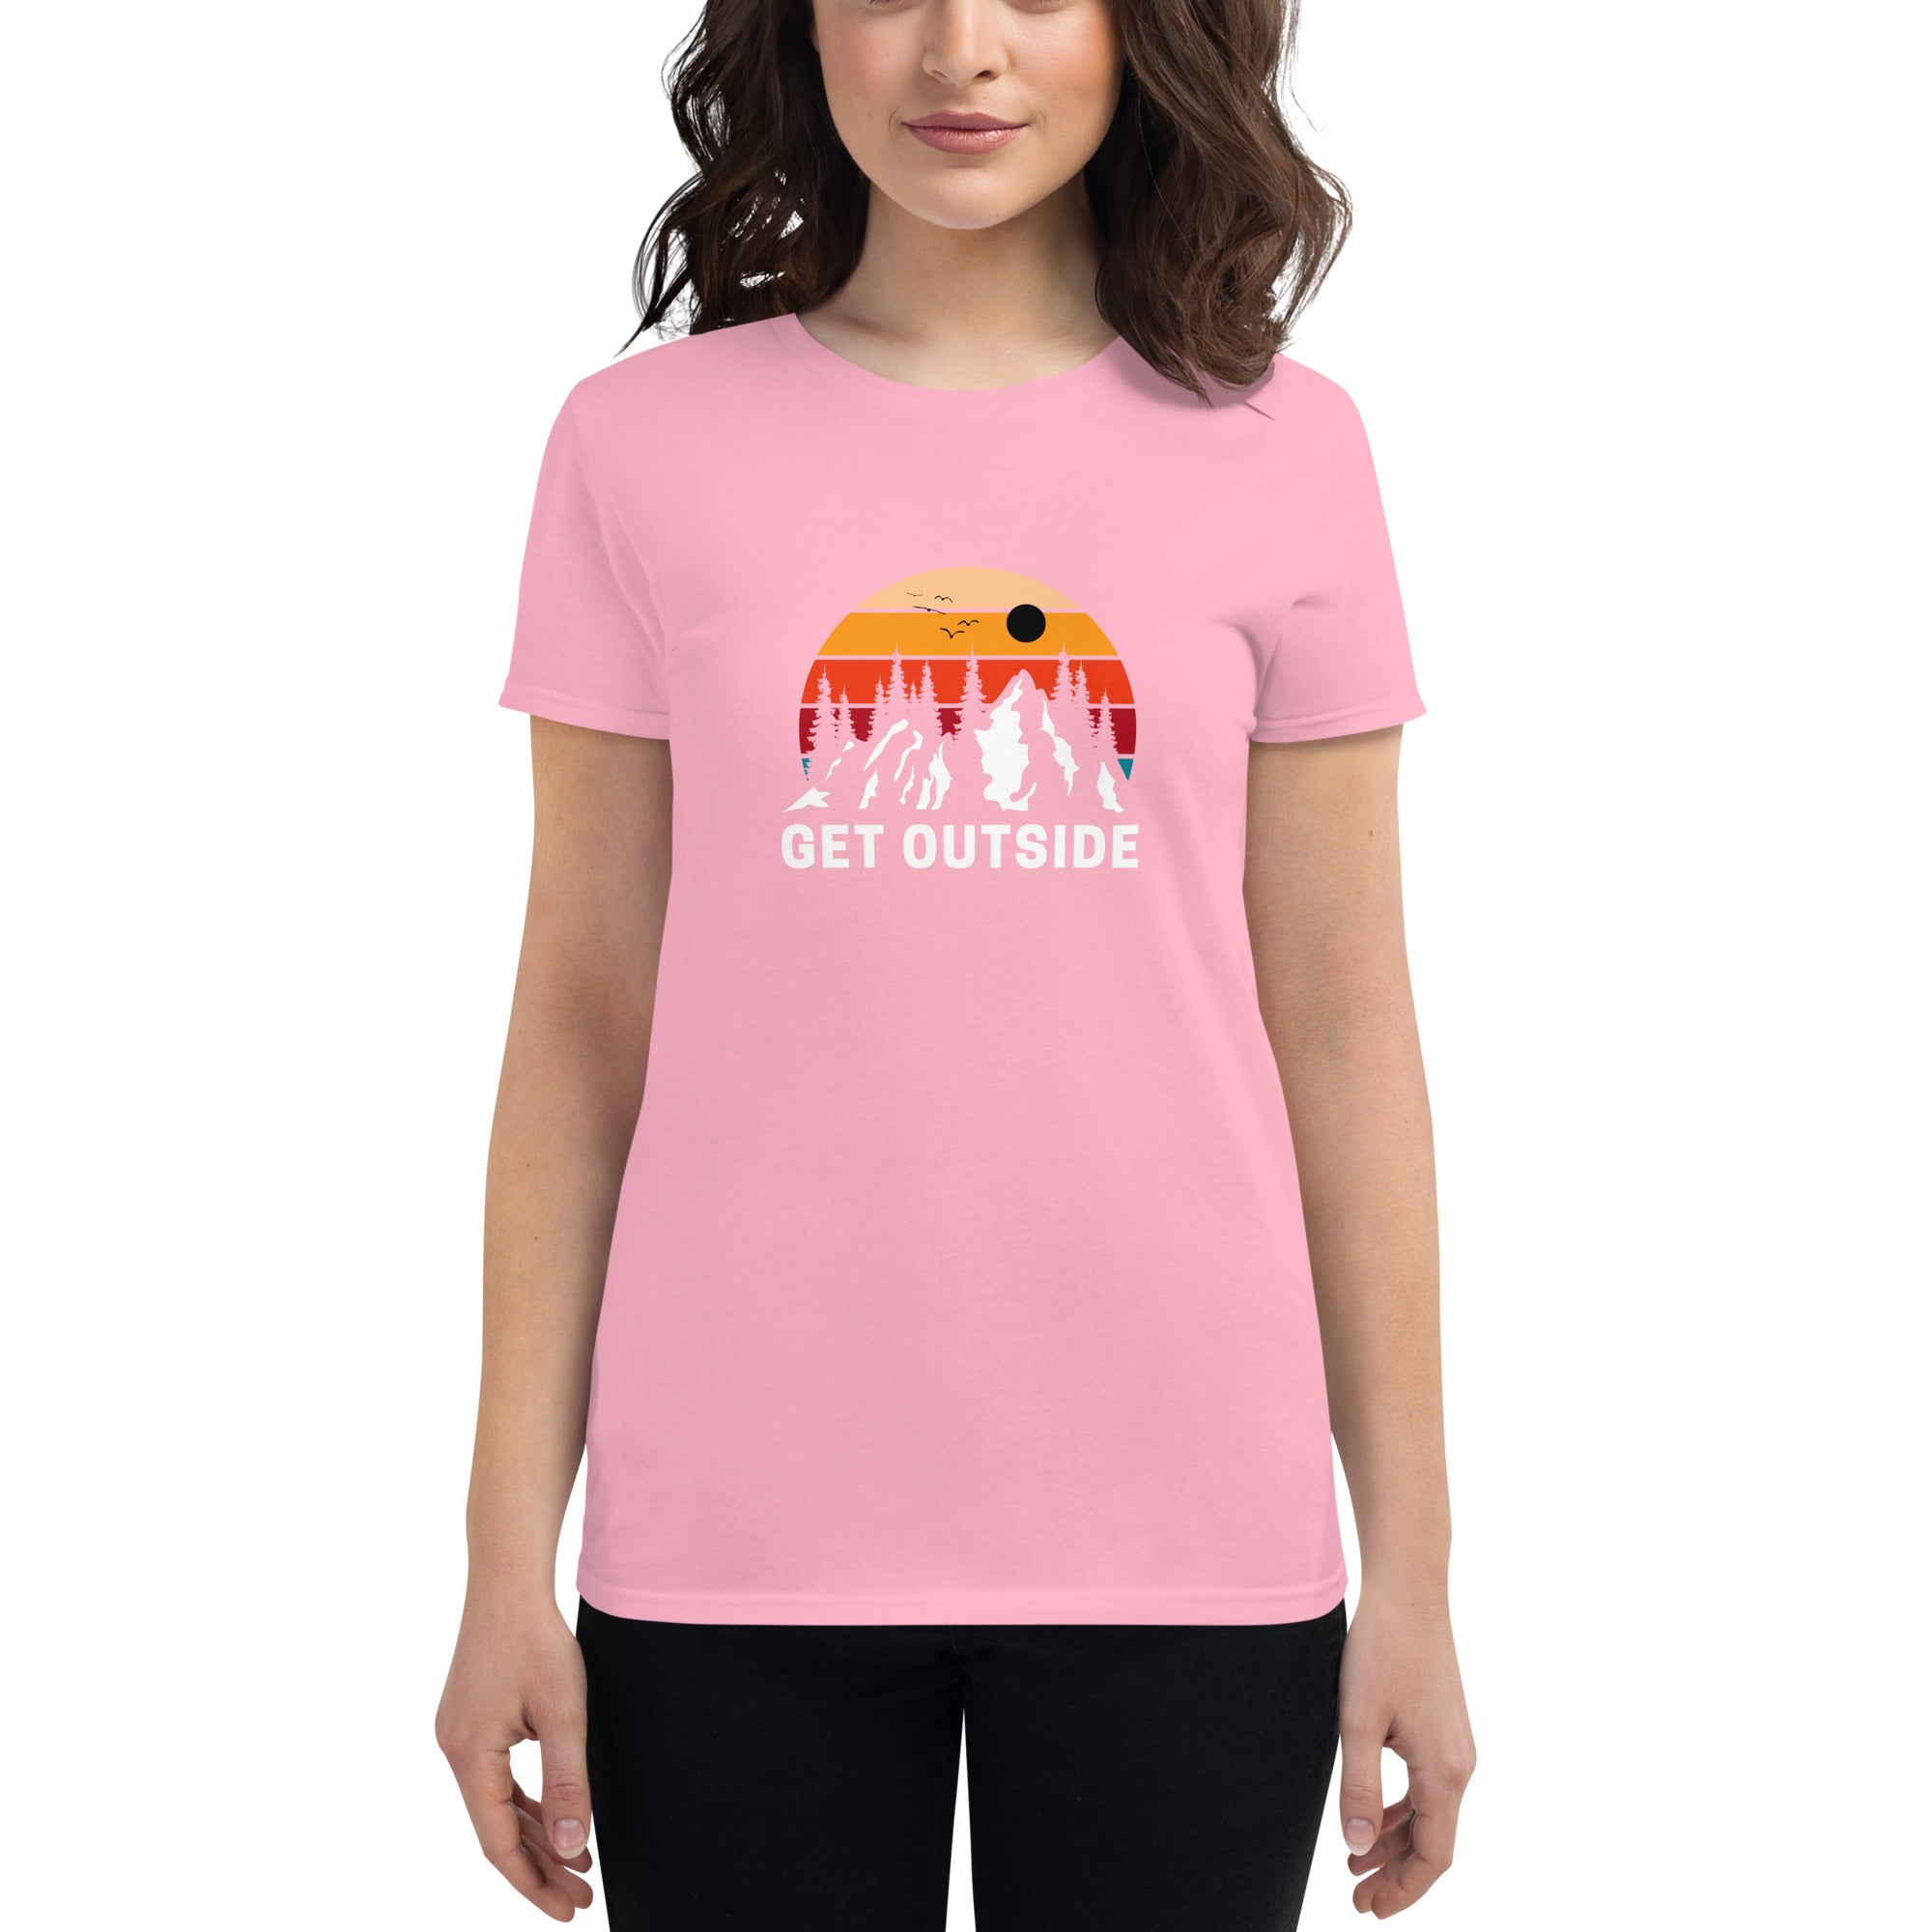 Get Outside Women's Fitted T-Shirt